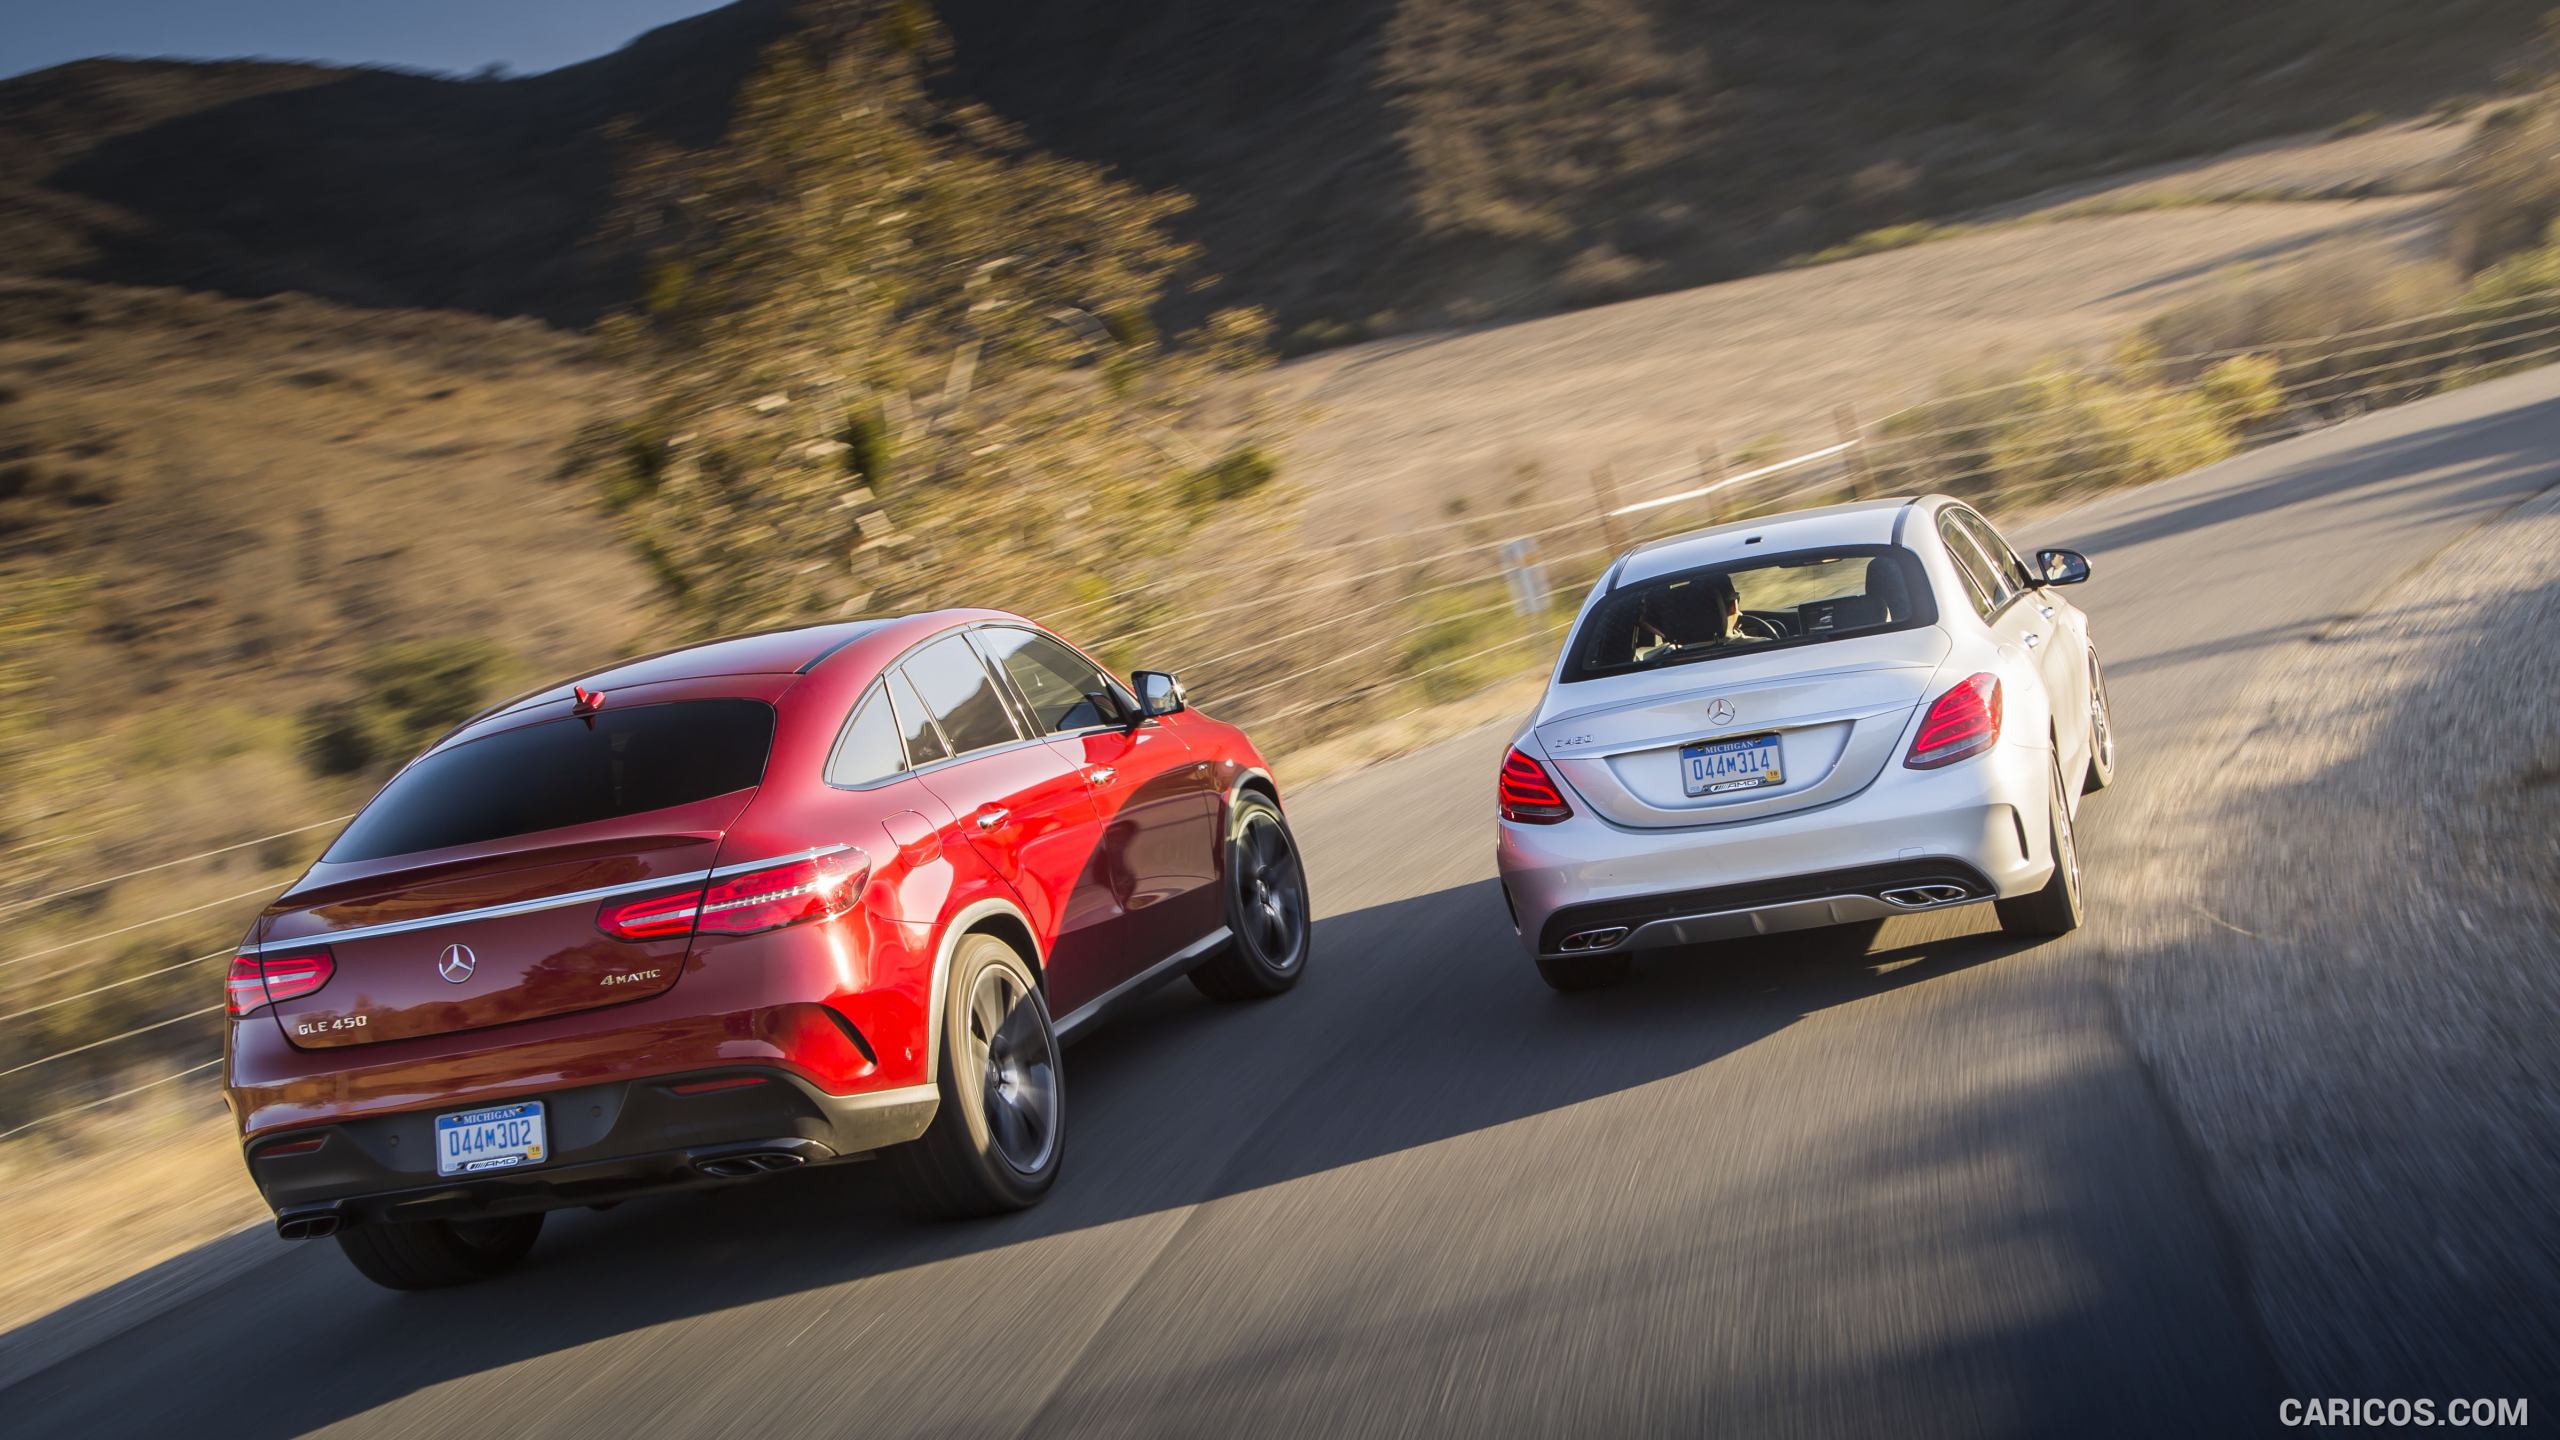 2016 Mercedes-Benz GLE 450 AMG Coupe 4MATIC (US-Spec) and C450 AMG - Rear, #100 of 115